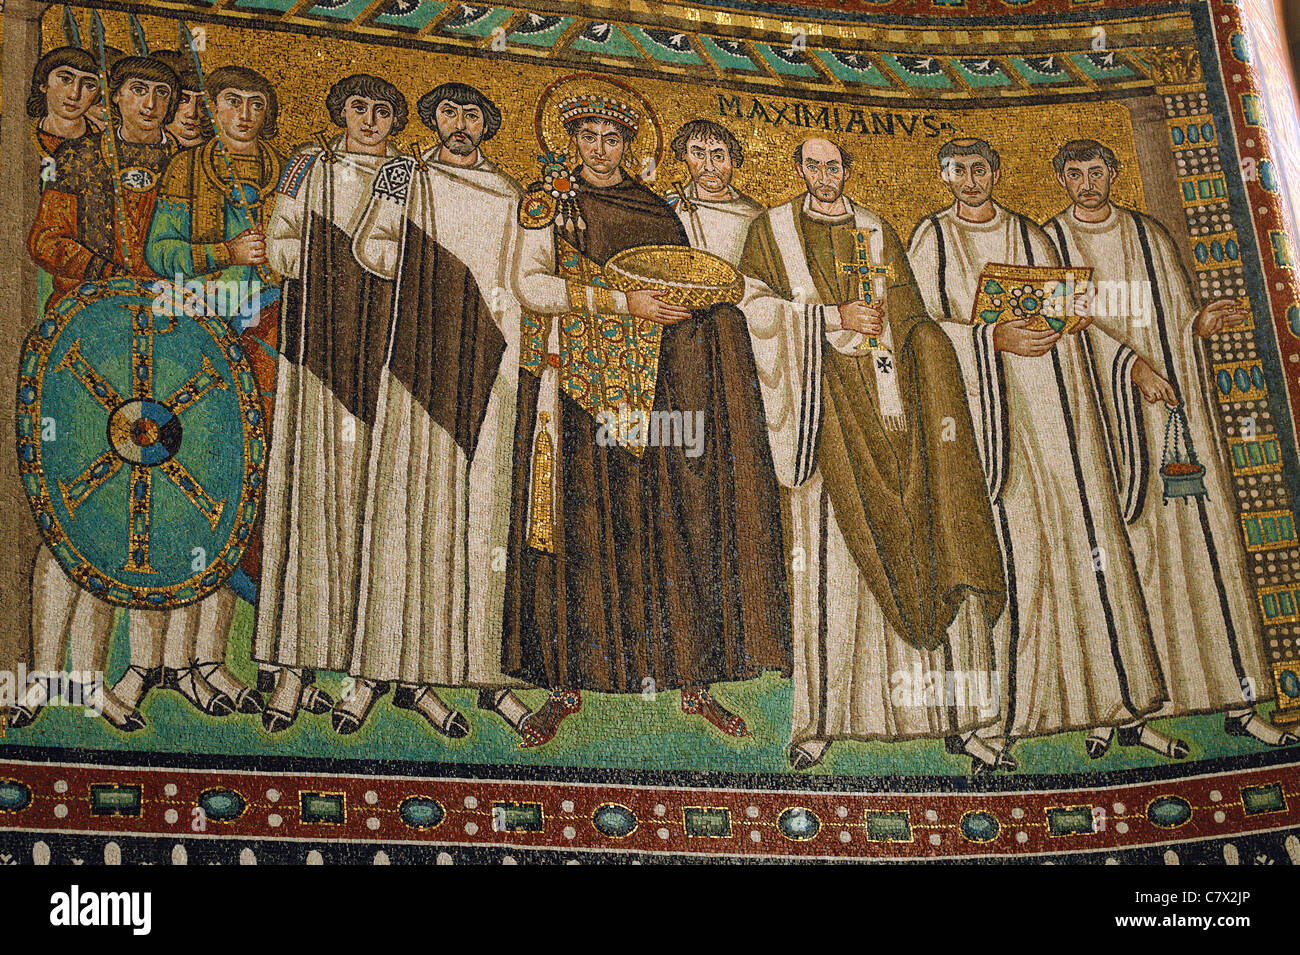 Emperor Justinian I and his court early 6th century mosaic San Vitale Church Ravenna Italy Stock Photo